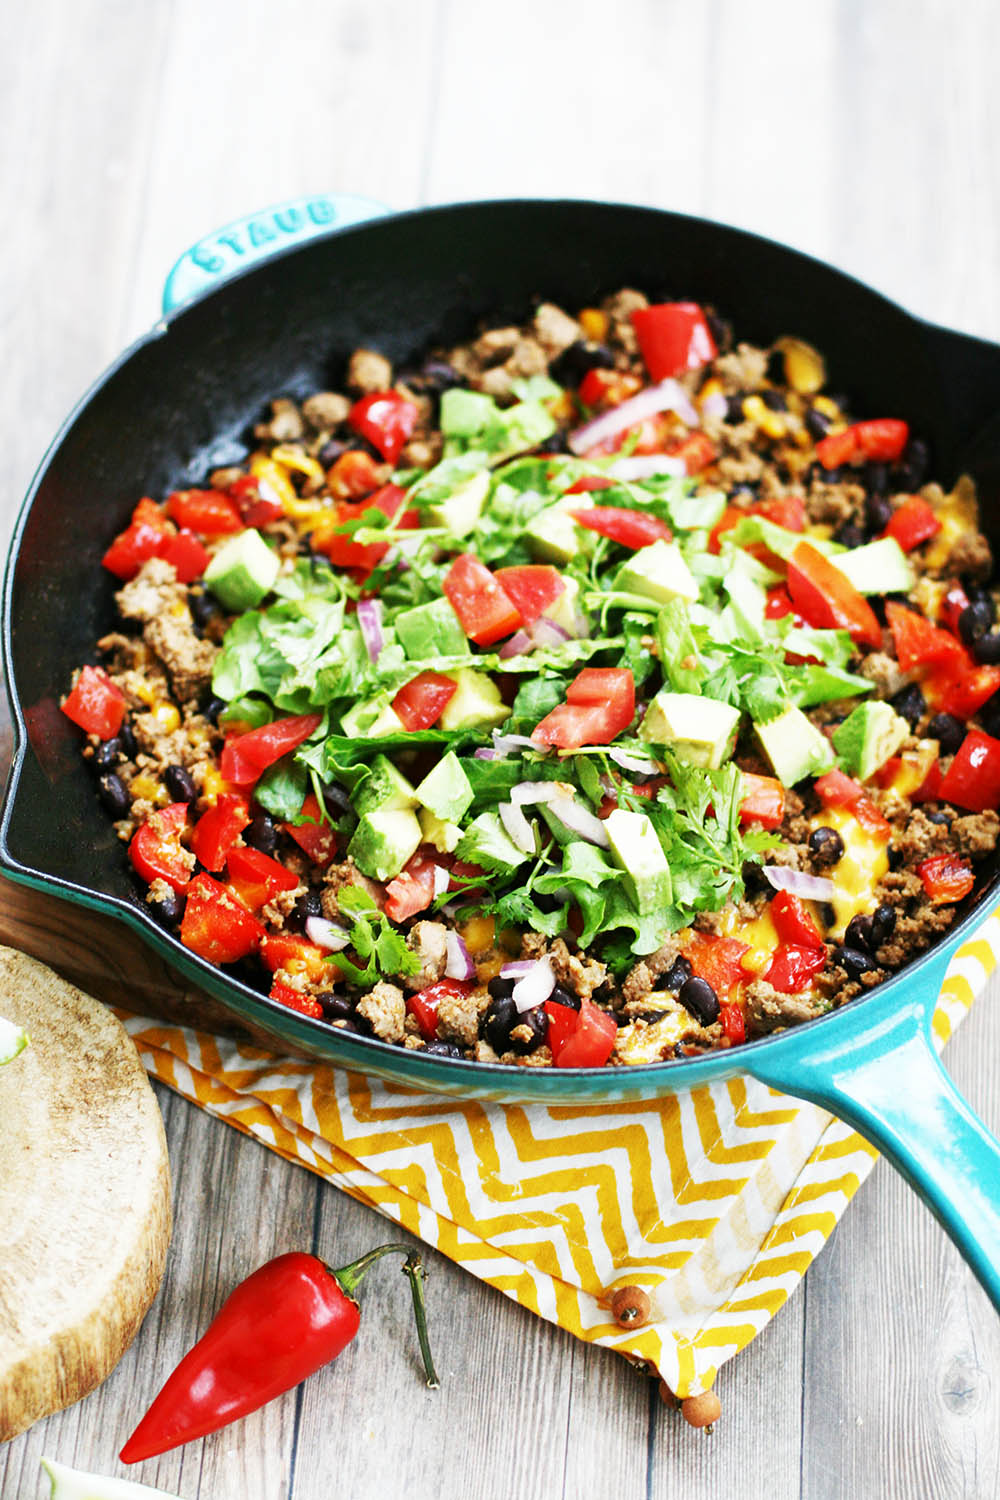 Mexican ground turkey skillet: Serve with tortillas, tortilla chips - or solo!